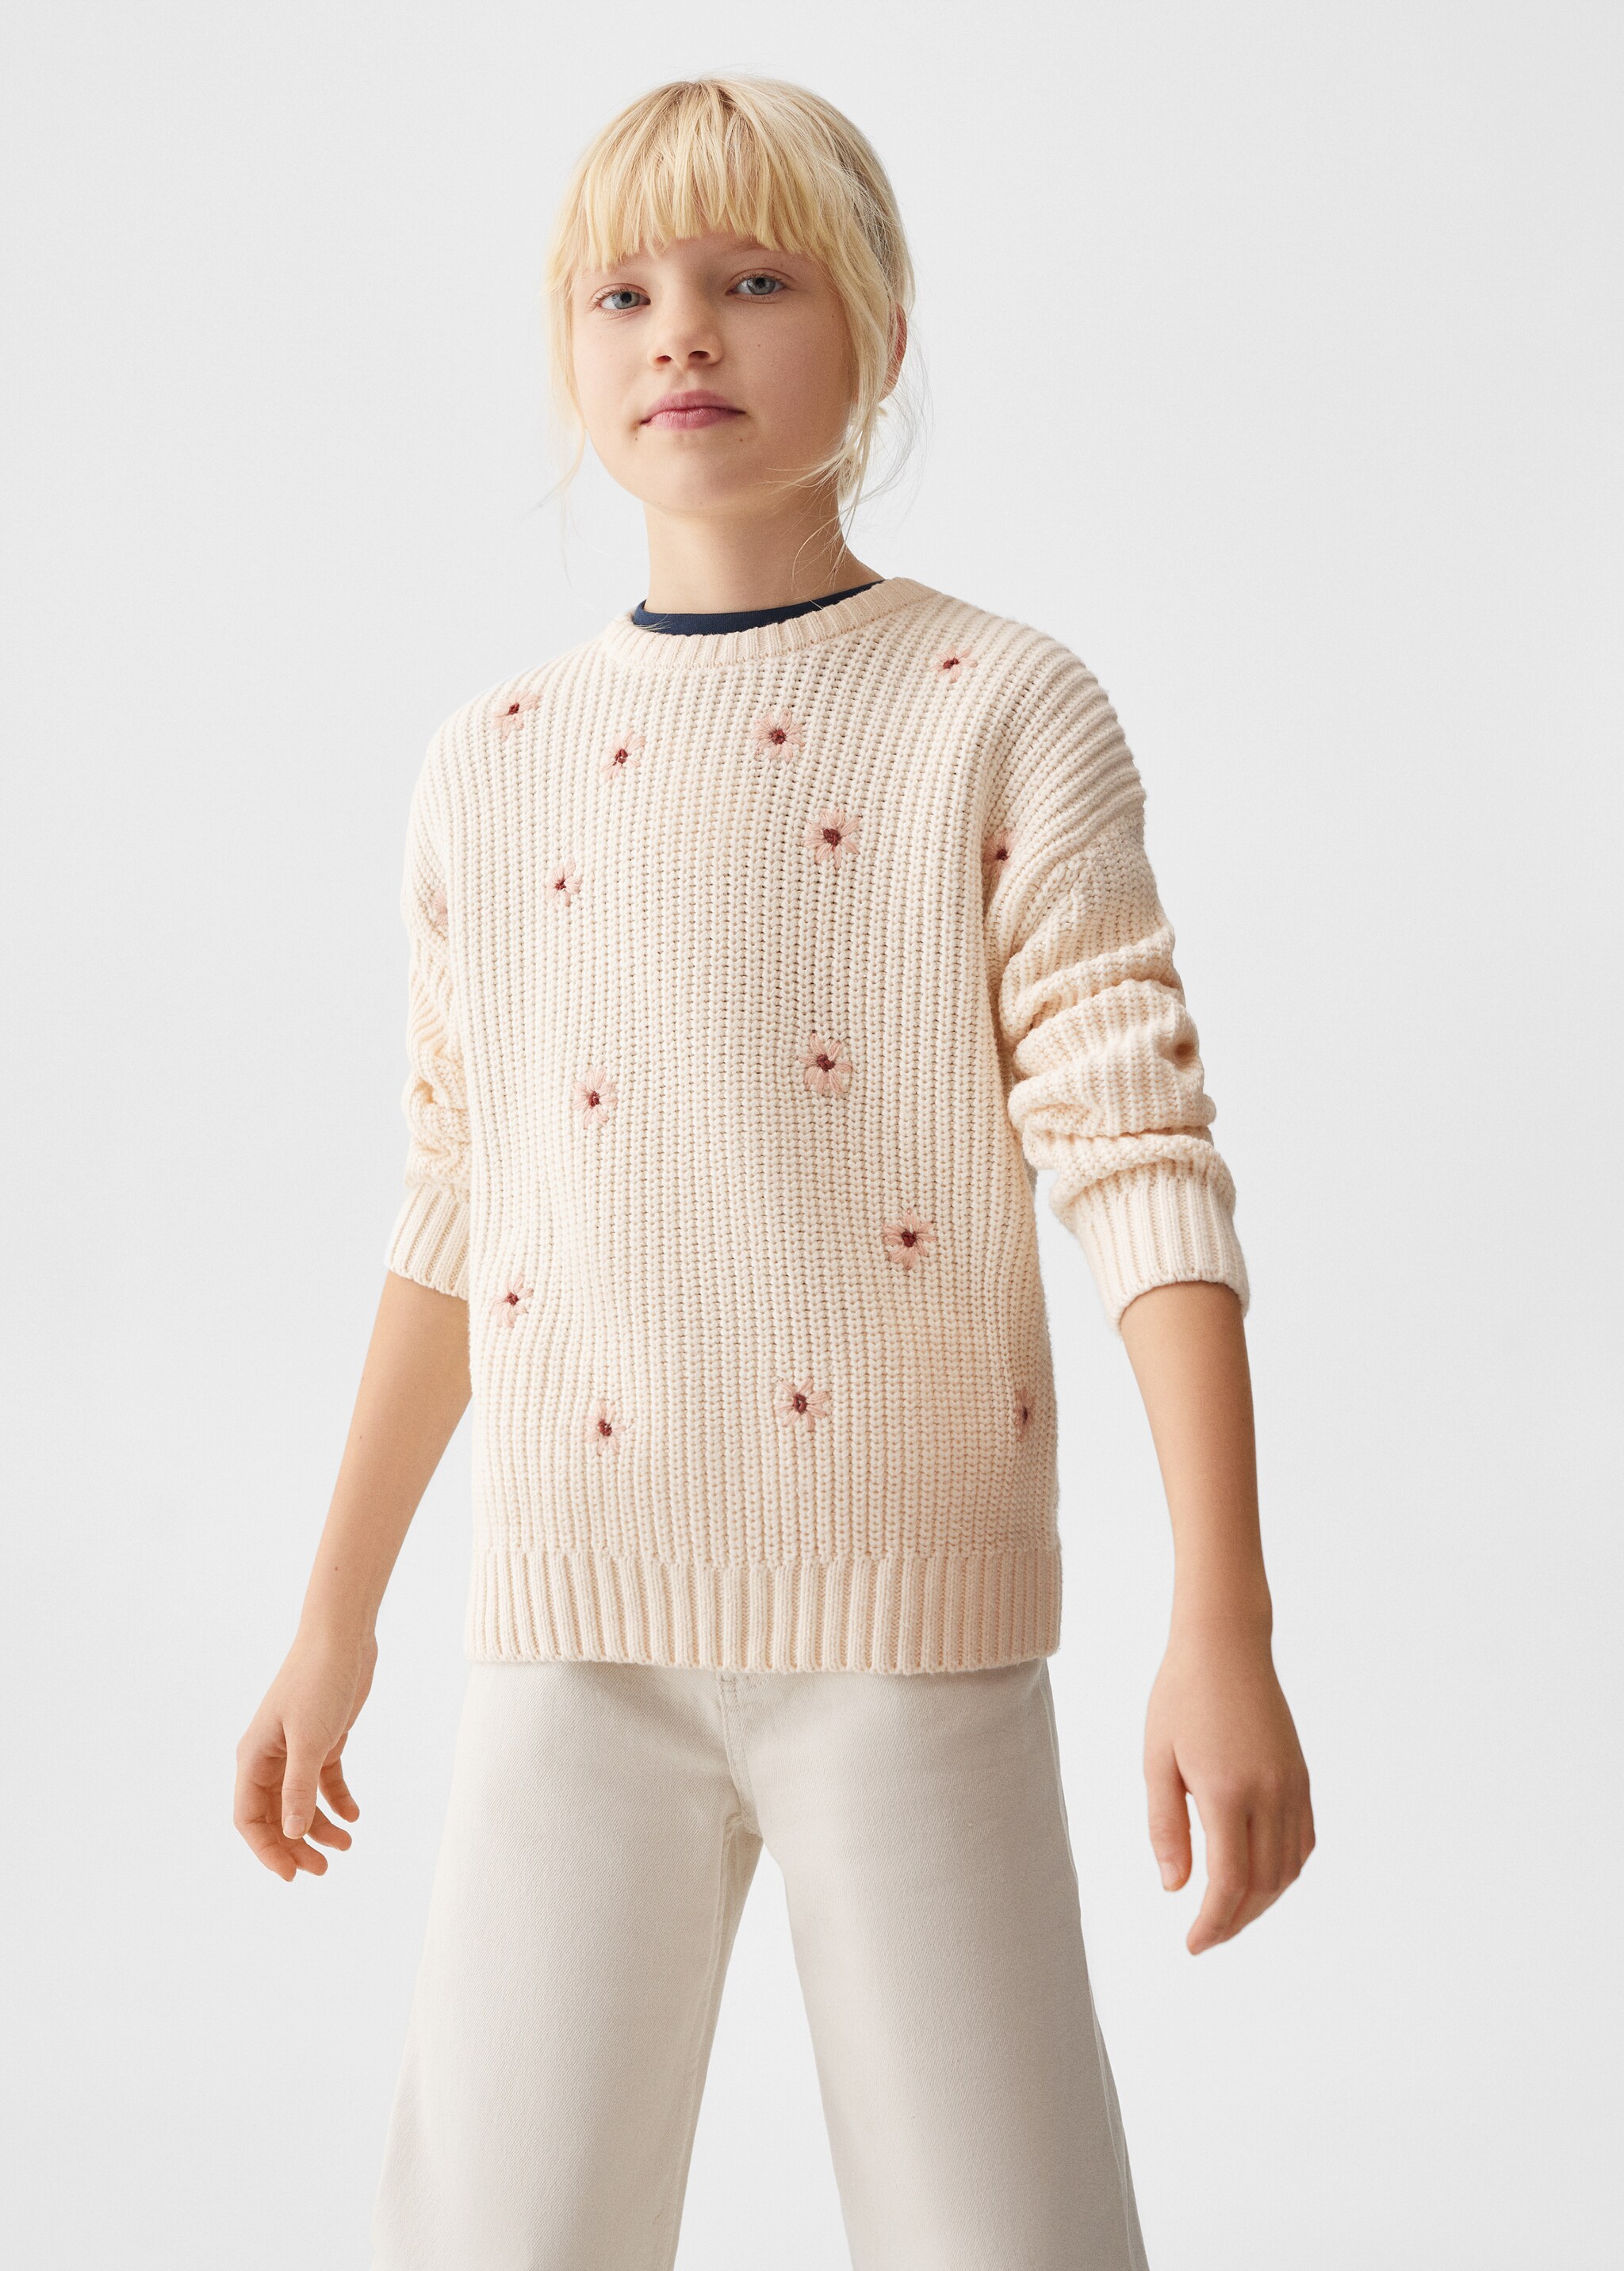 Pull-over broderie florale - Plan moyen